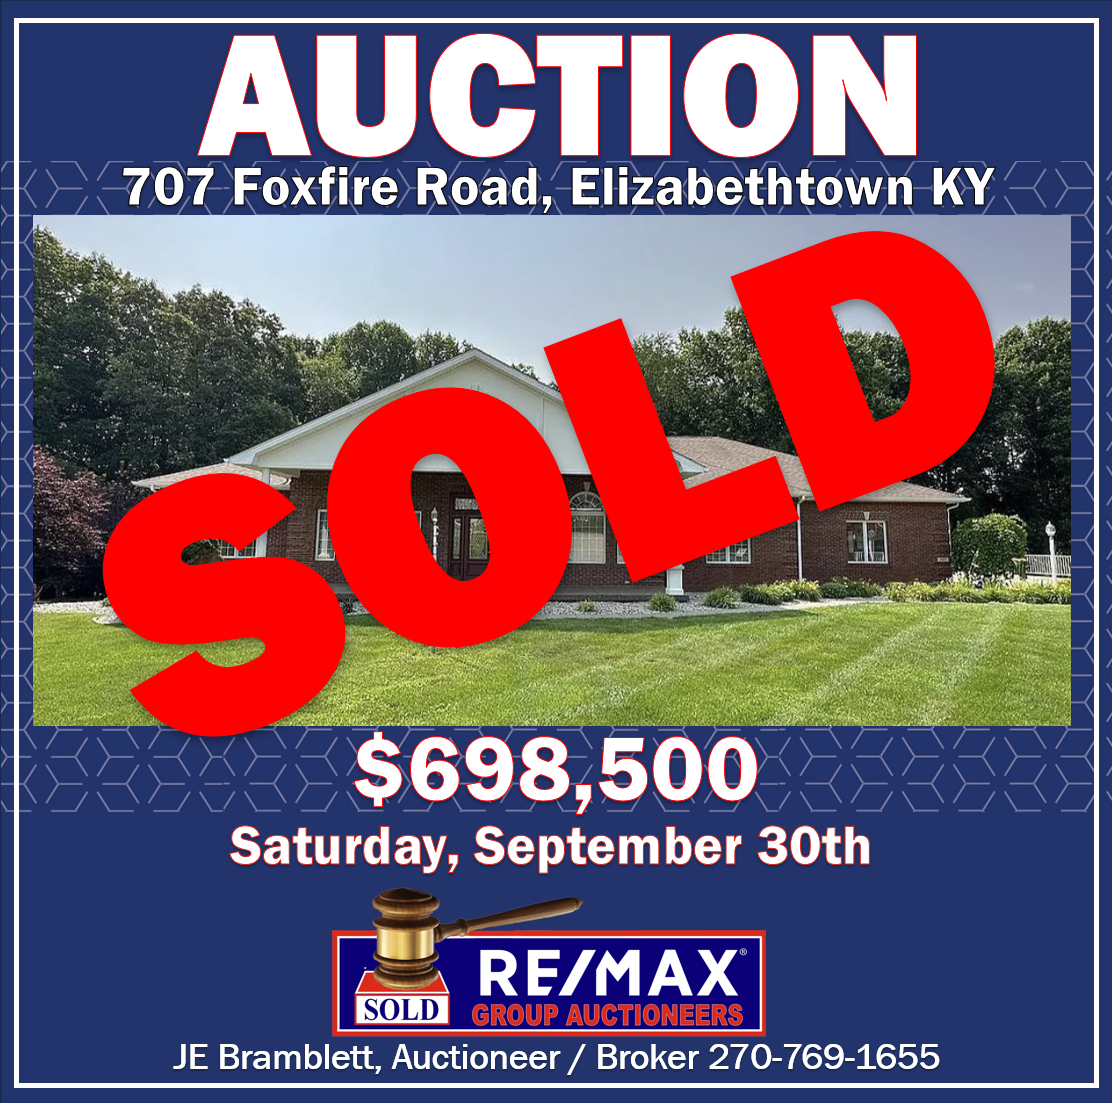 Upcoming Auctions Archives - RE/MAX Group Auctioneers, Hardin County, Elizabethtown, Fort Knox